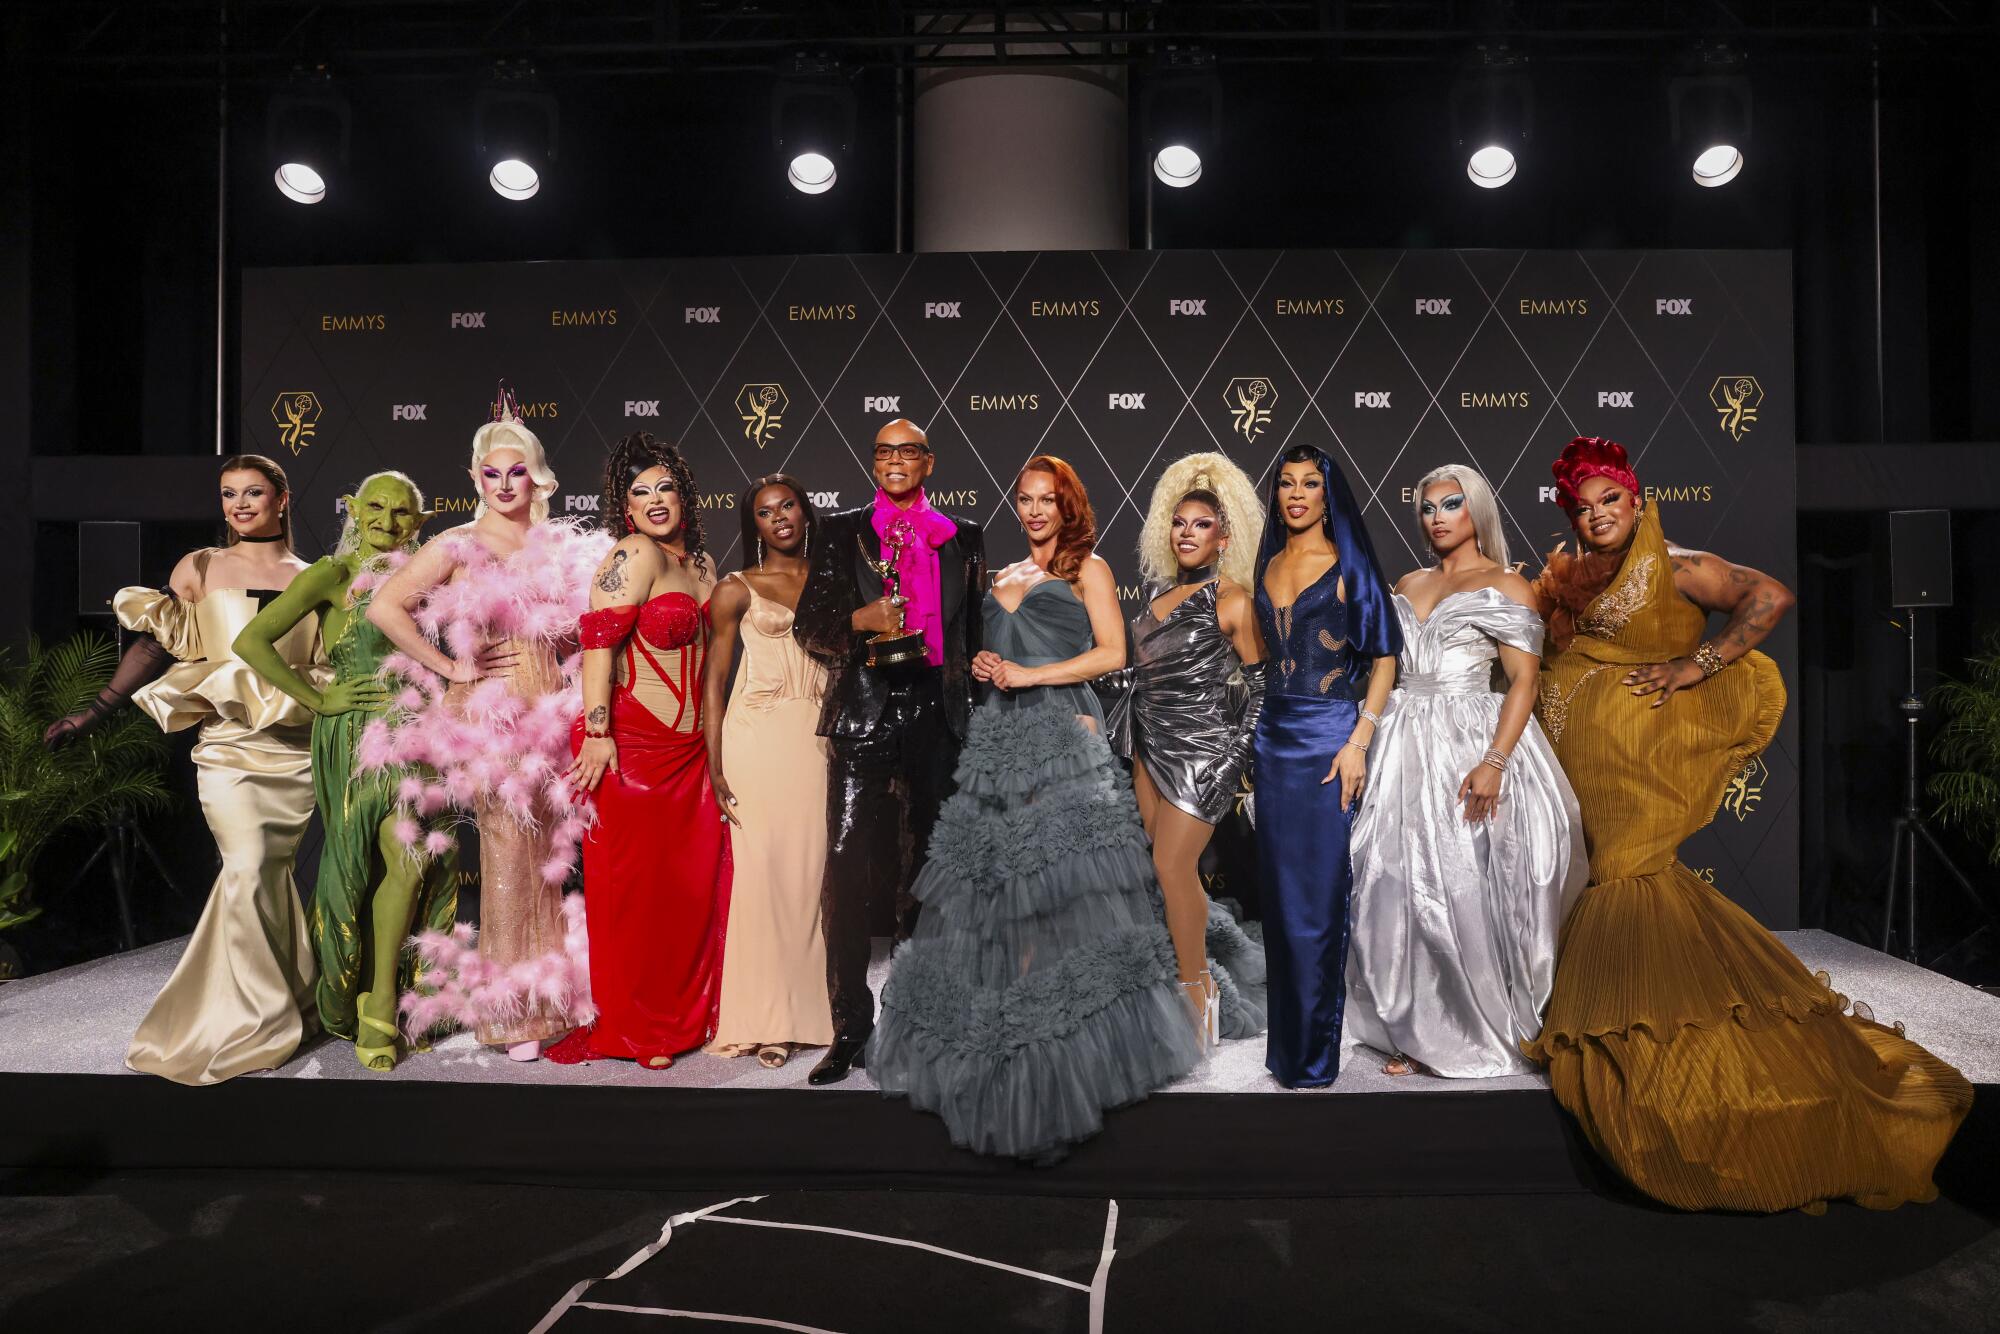 RuPaul and the cast of "RuPaul's Drag Race" sashayed into the press room.